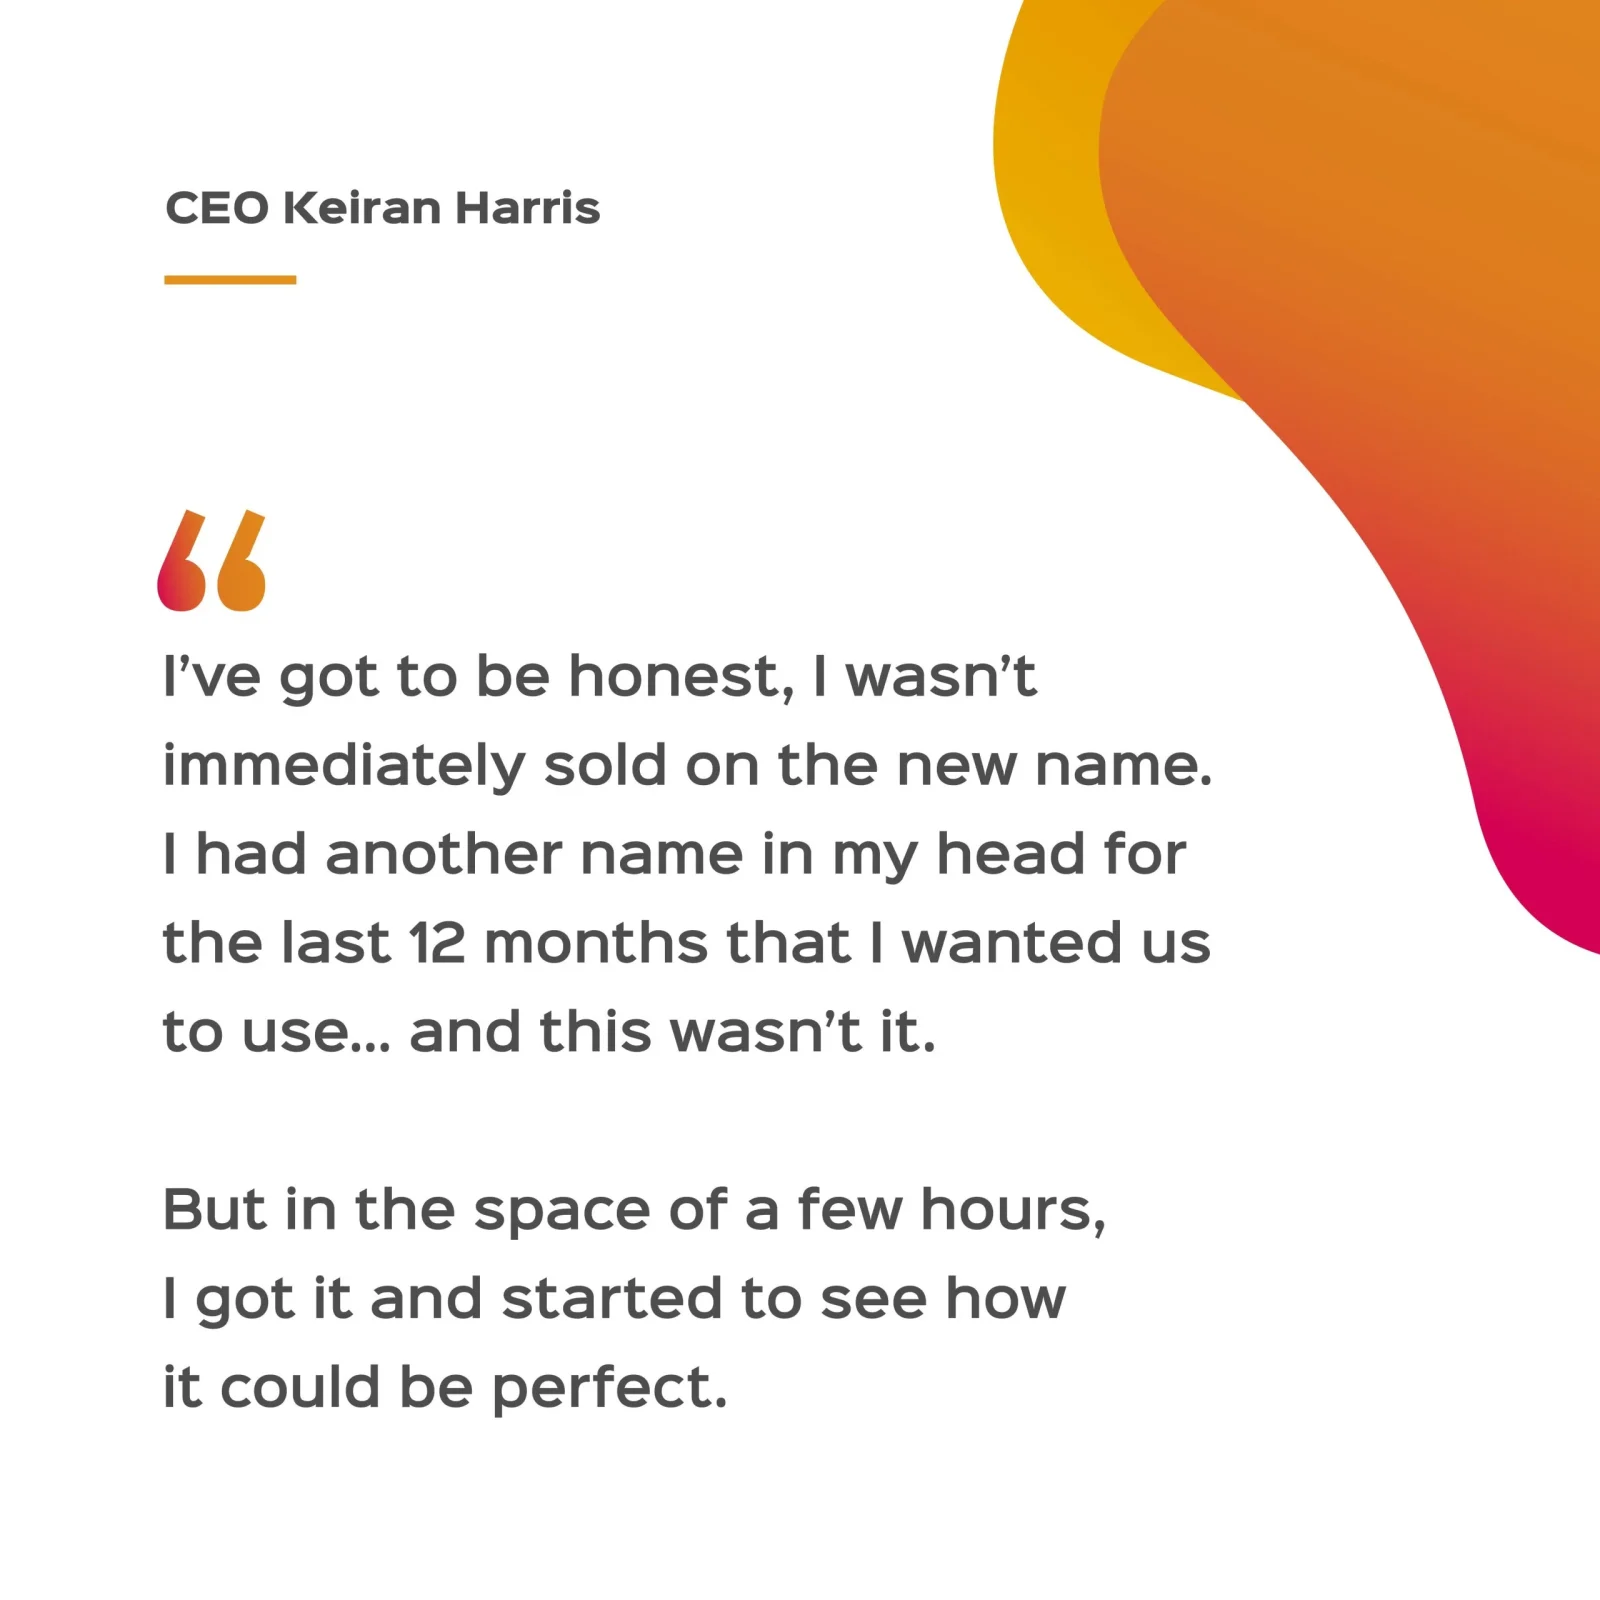 Graphic designed by a design agency in Bristol, featuring abstract orange and pink shapes on a white background, includes a quote by CEO Keiran Harris about changing his mind on a name for the last 12